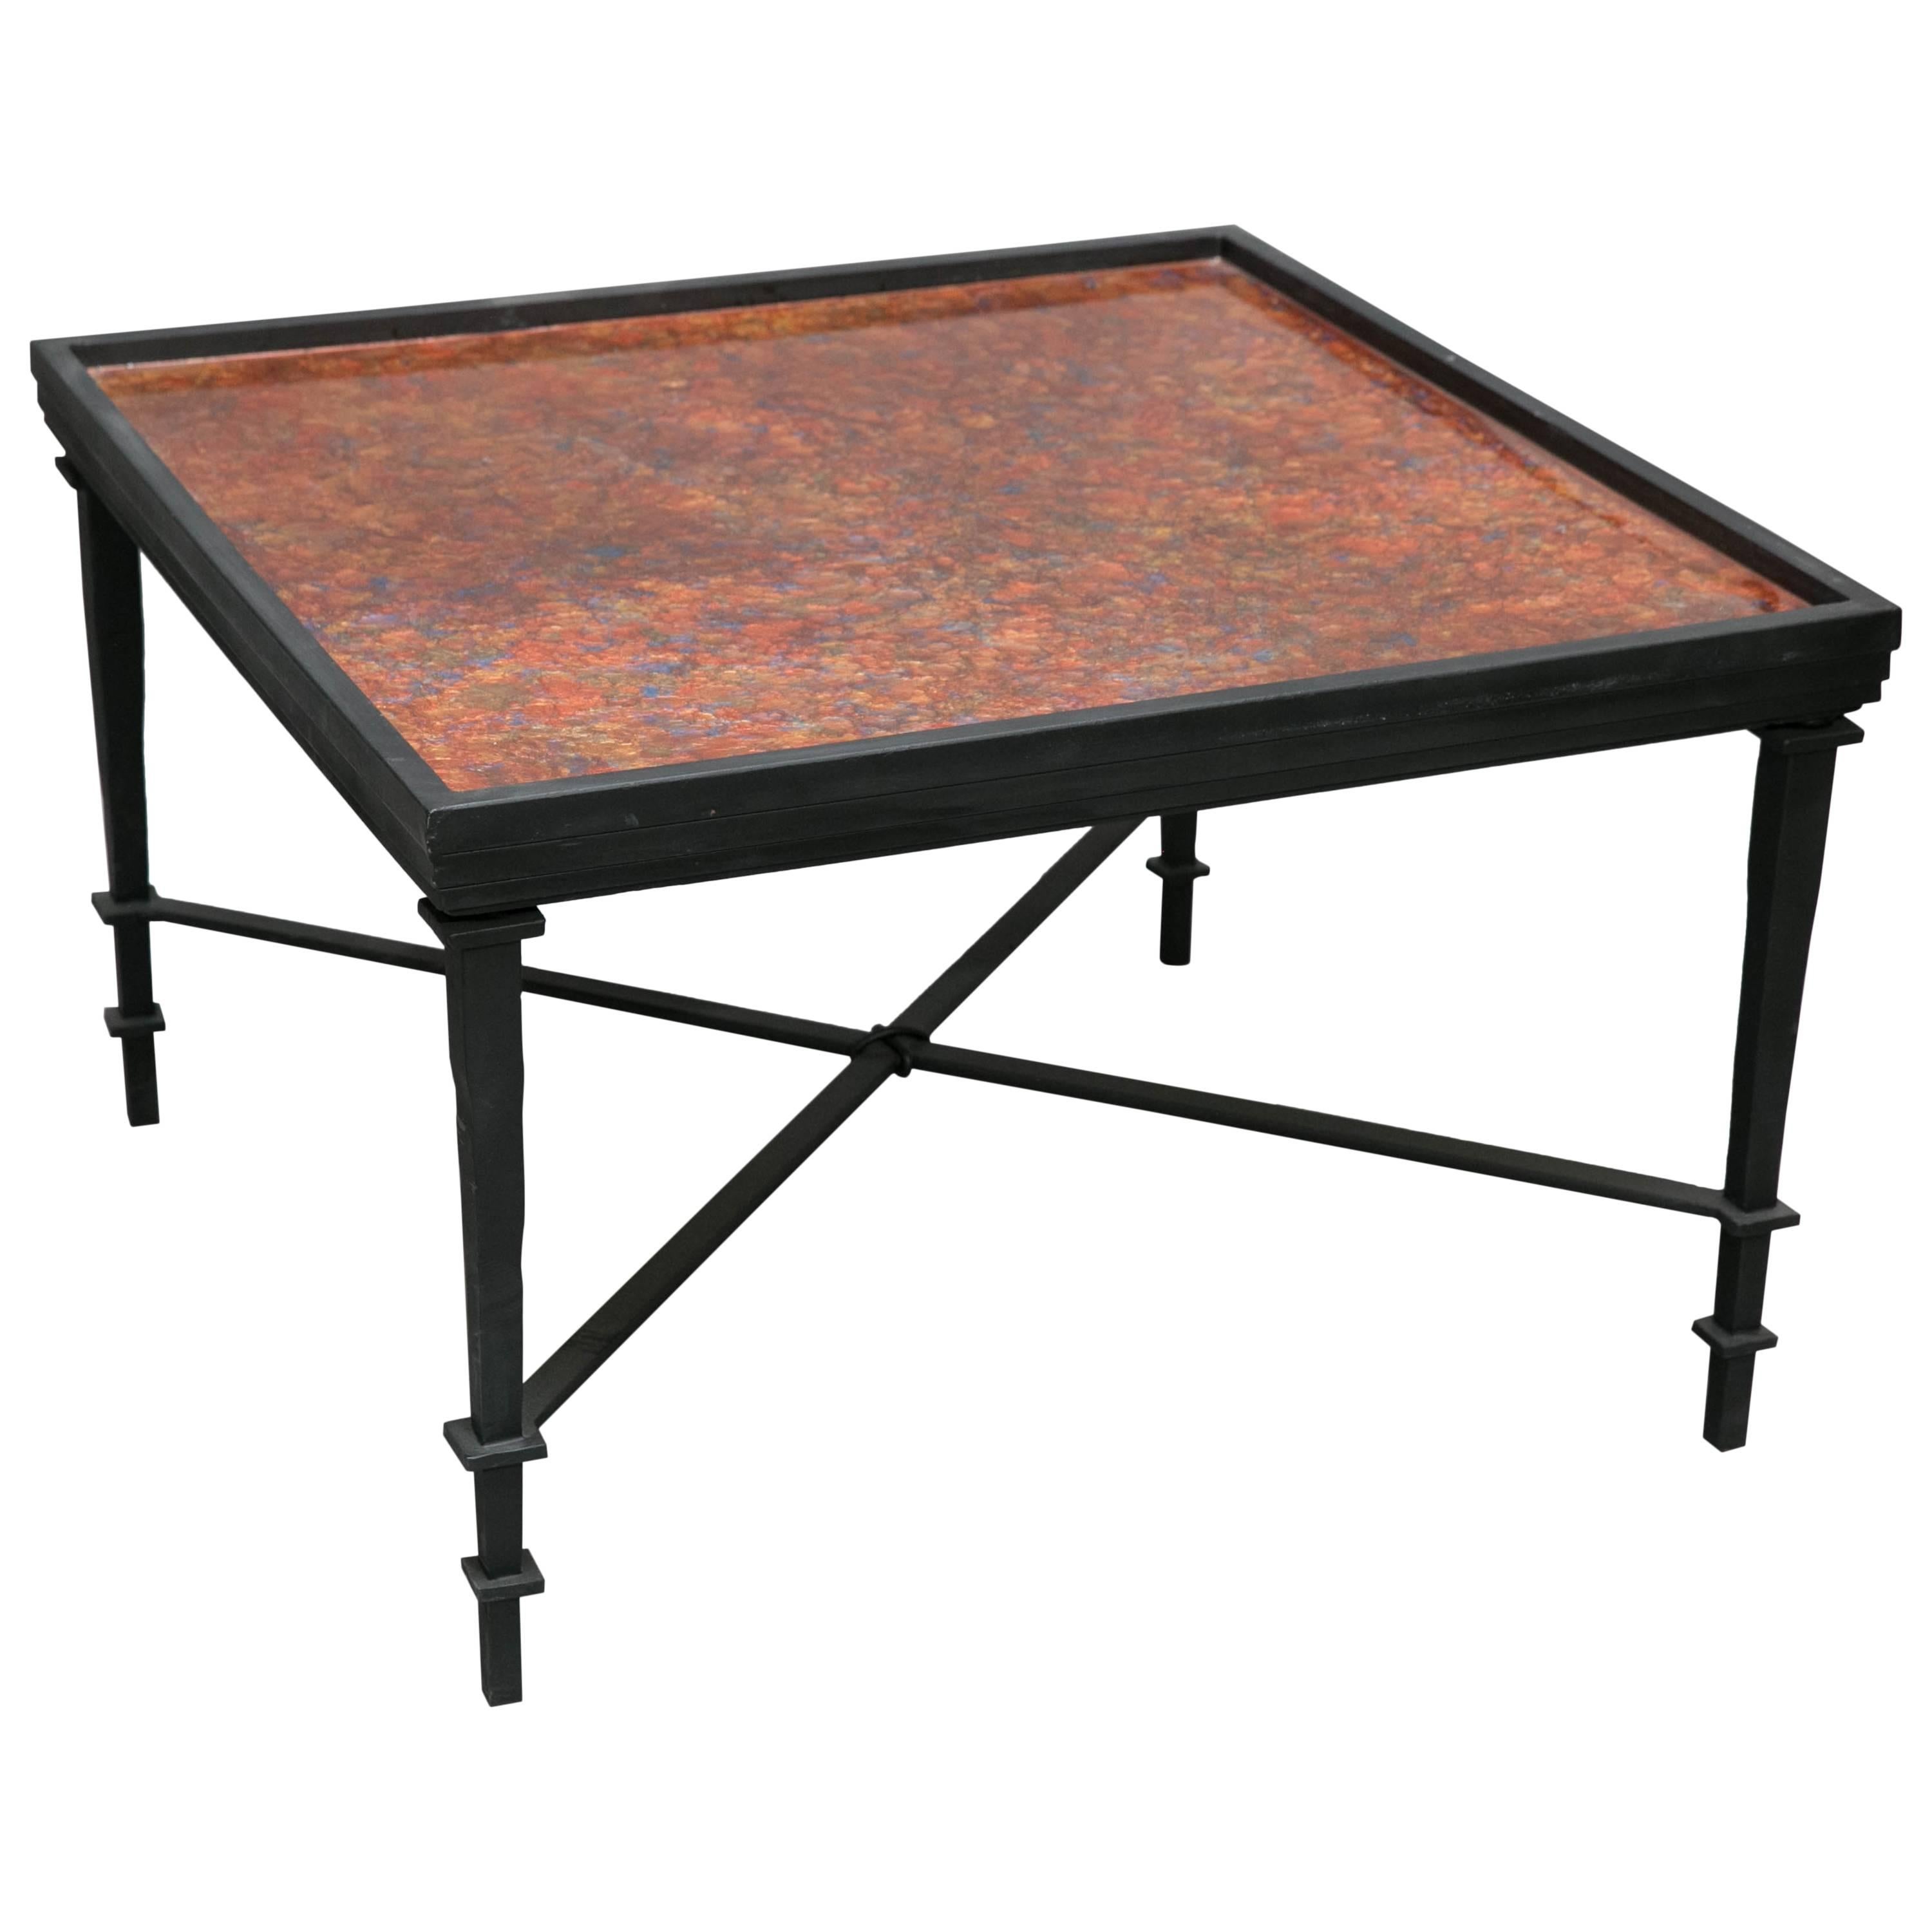 William Loyd Hand-Painted Iron Coffee Table For Sale